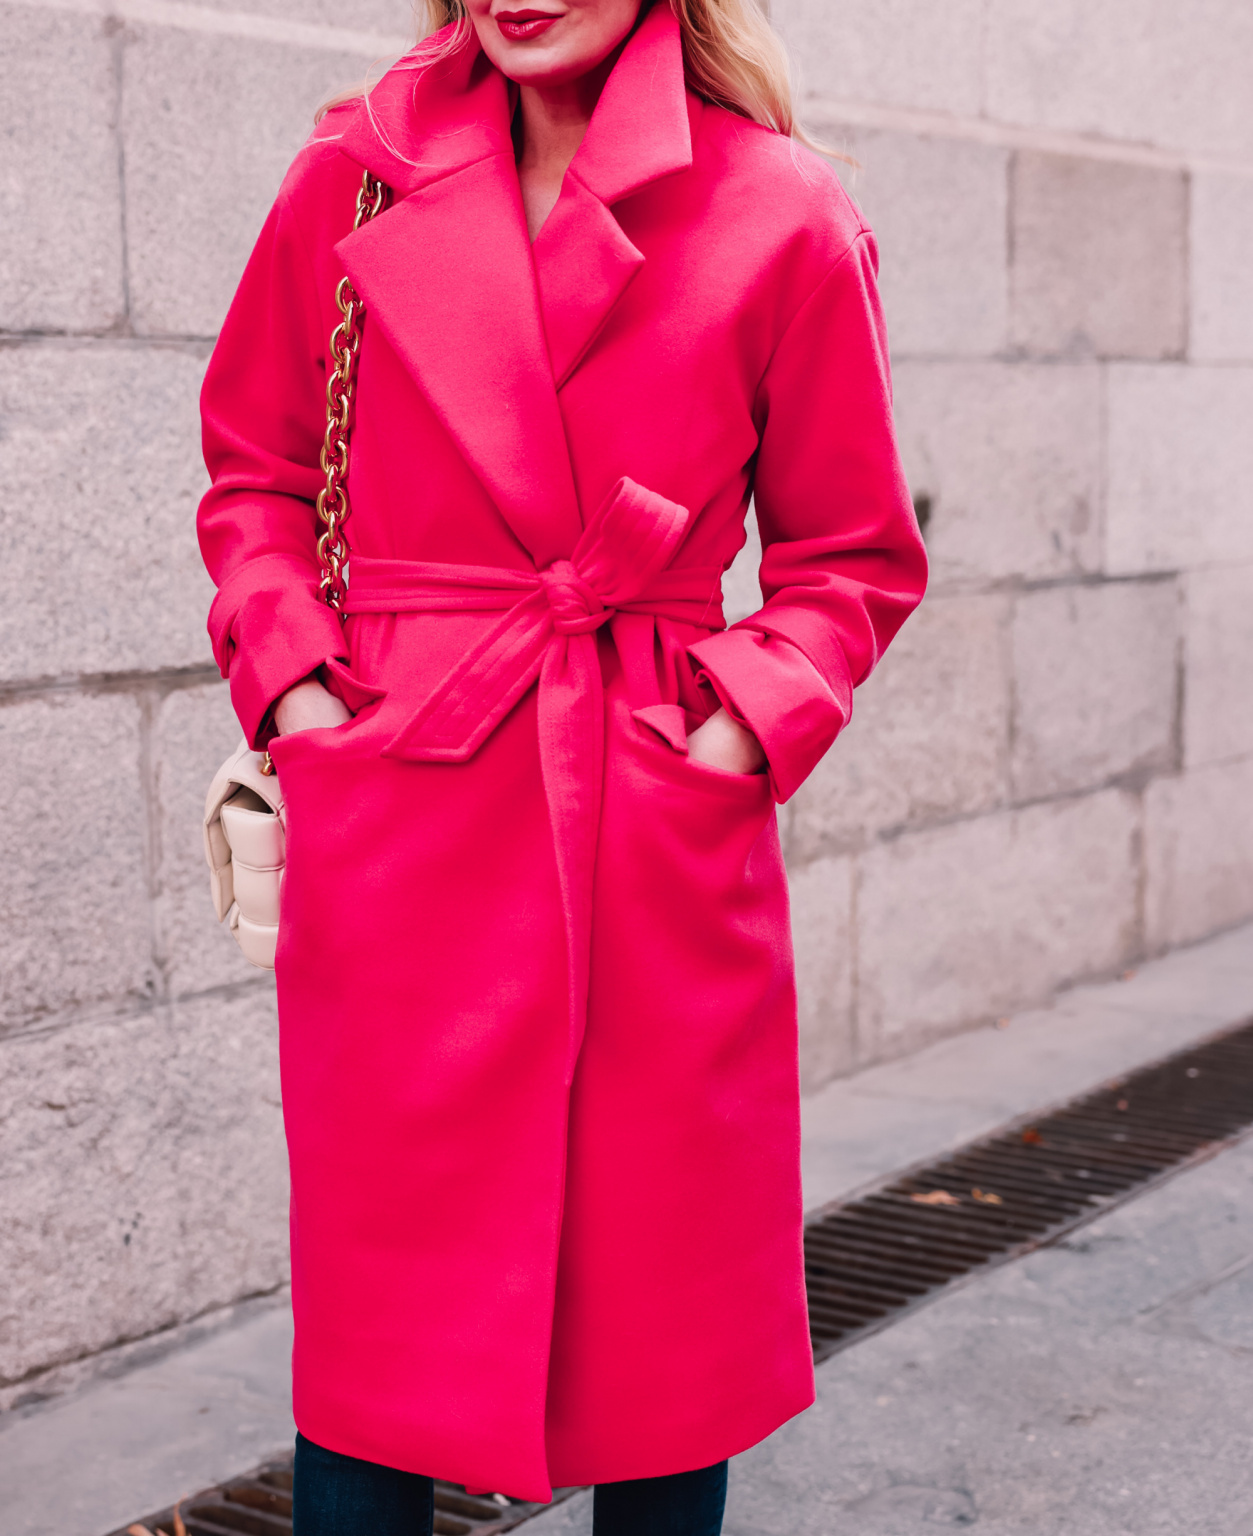 How To Wear A Statement Coat…This Is My #1 Biggest Secret!